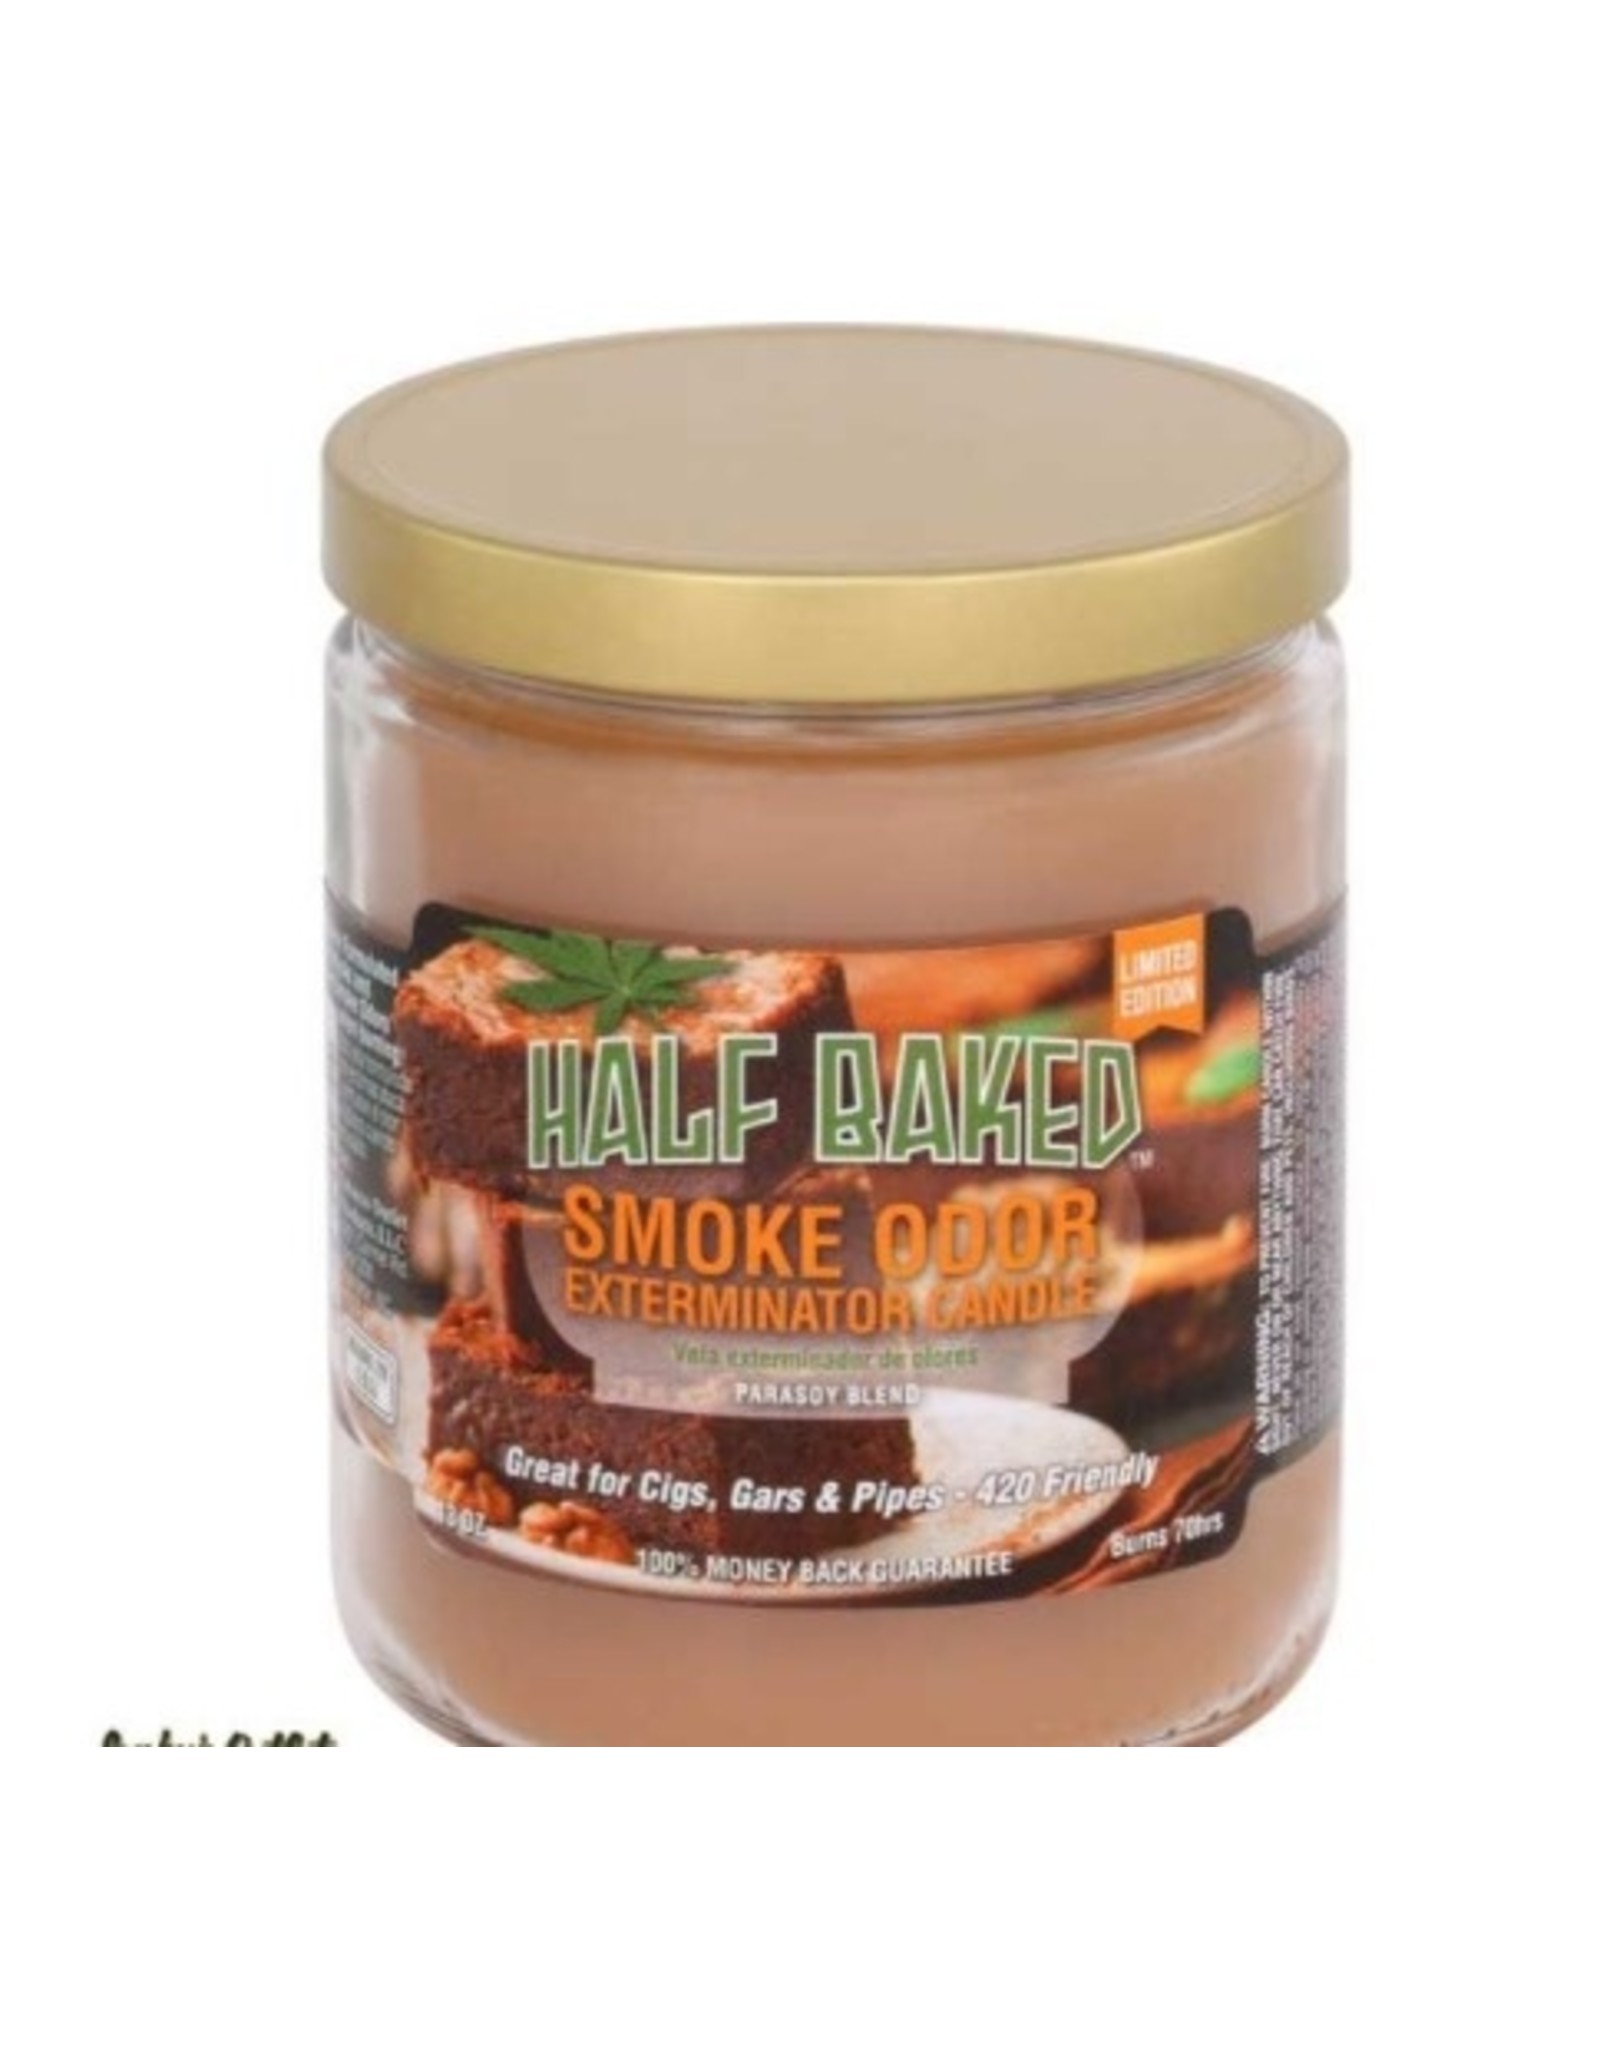 smoke odor exterminator SMOKE ODOR EXTERMINATOR CANDLE- Half Baked